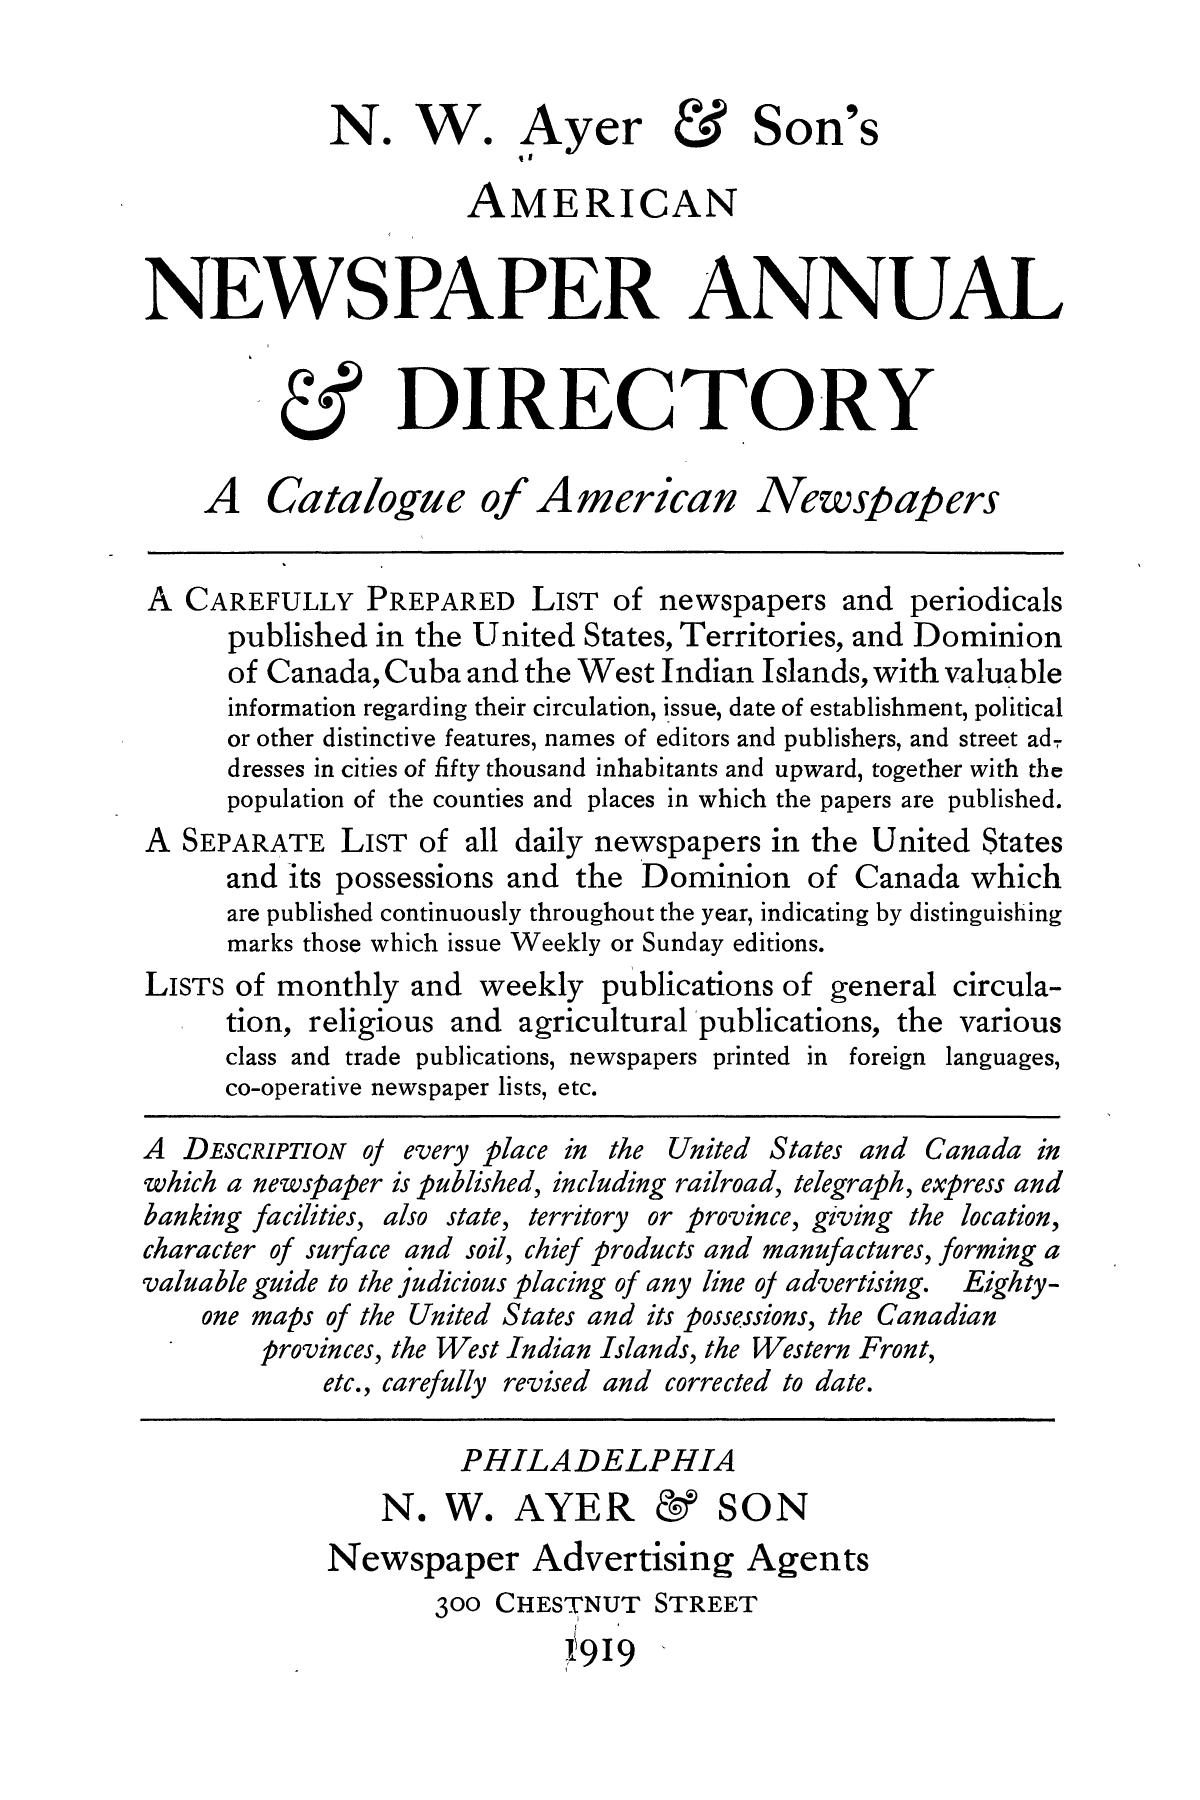 N. W. Ayer & Son's American Newspaper Annual and Directory: A Catalogue of American Newspapers, 1919, Volume 2
                                                
                                                    Title Page
                                                